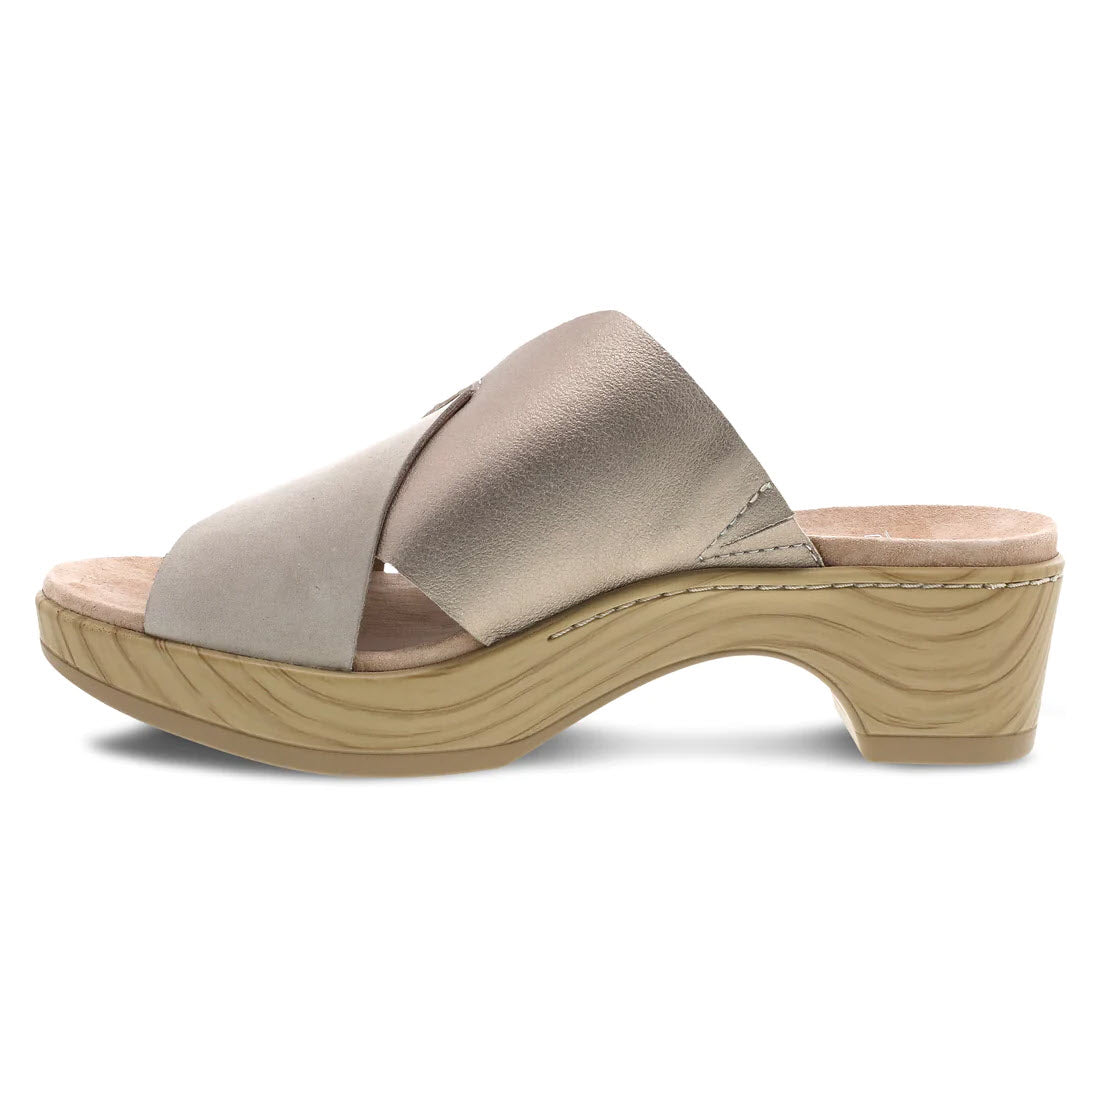 A single beige, open-toe slide sandal with a wide leather top strap and wooden platform sole, viewed from the side against a white background, like the Dansko Miri Sand Multi - Womens.